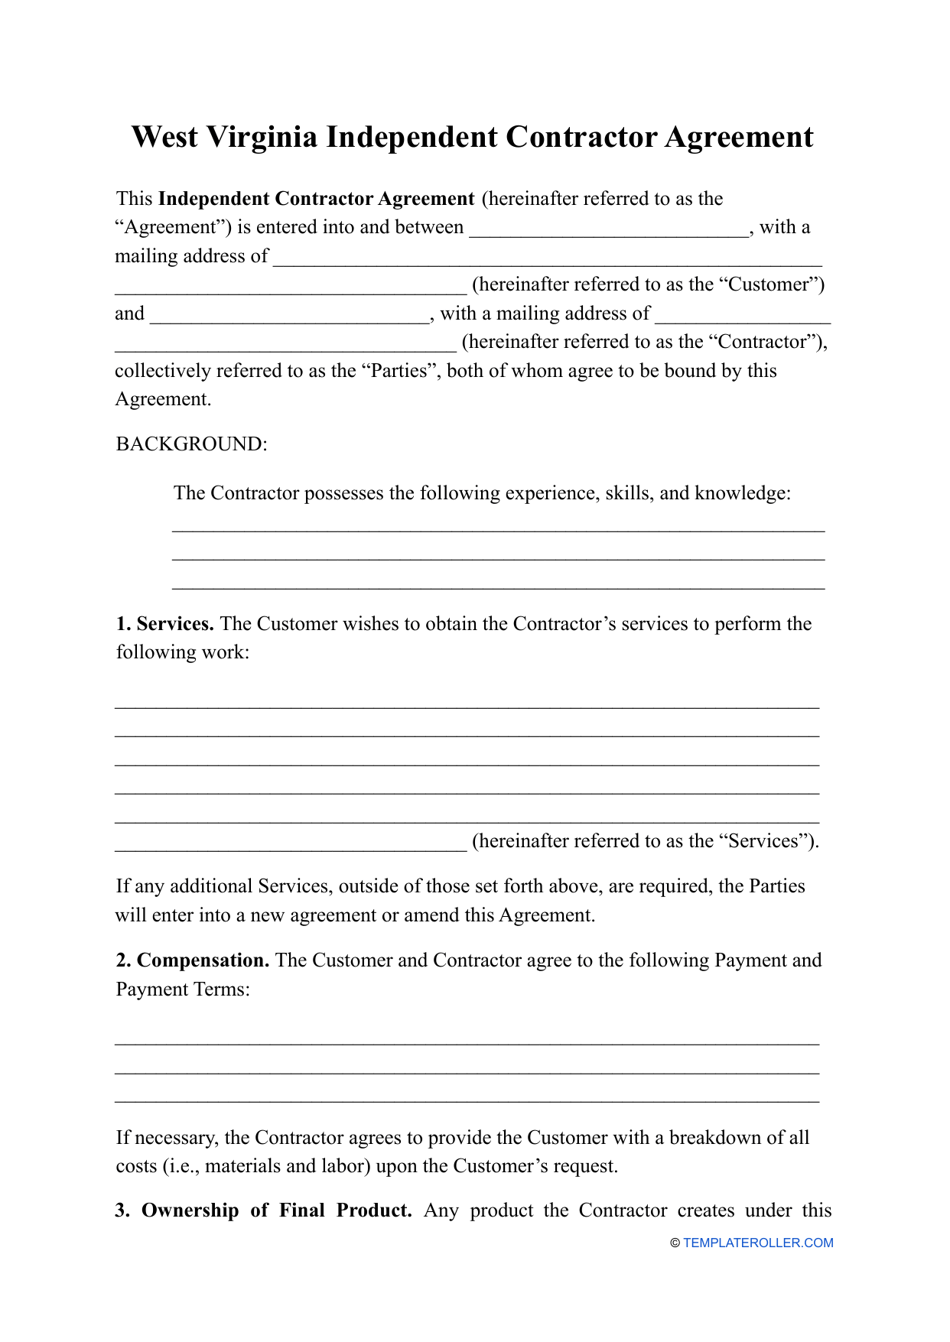 Independent Contractor Agreement Template - West Virginia, Page 1